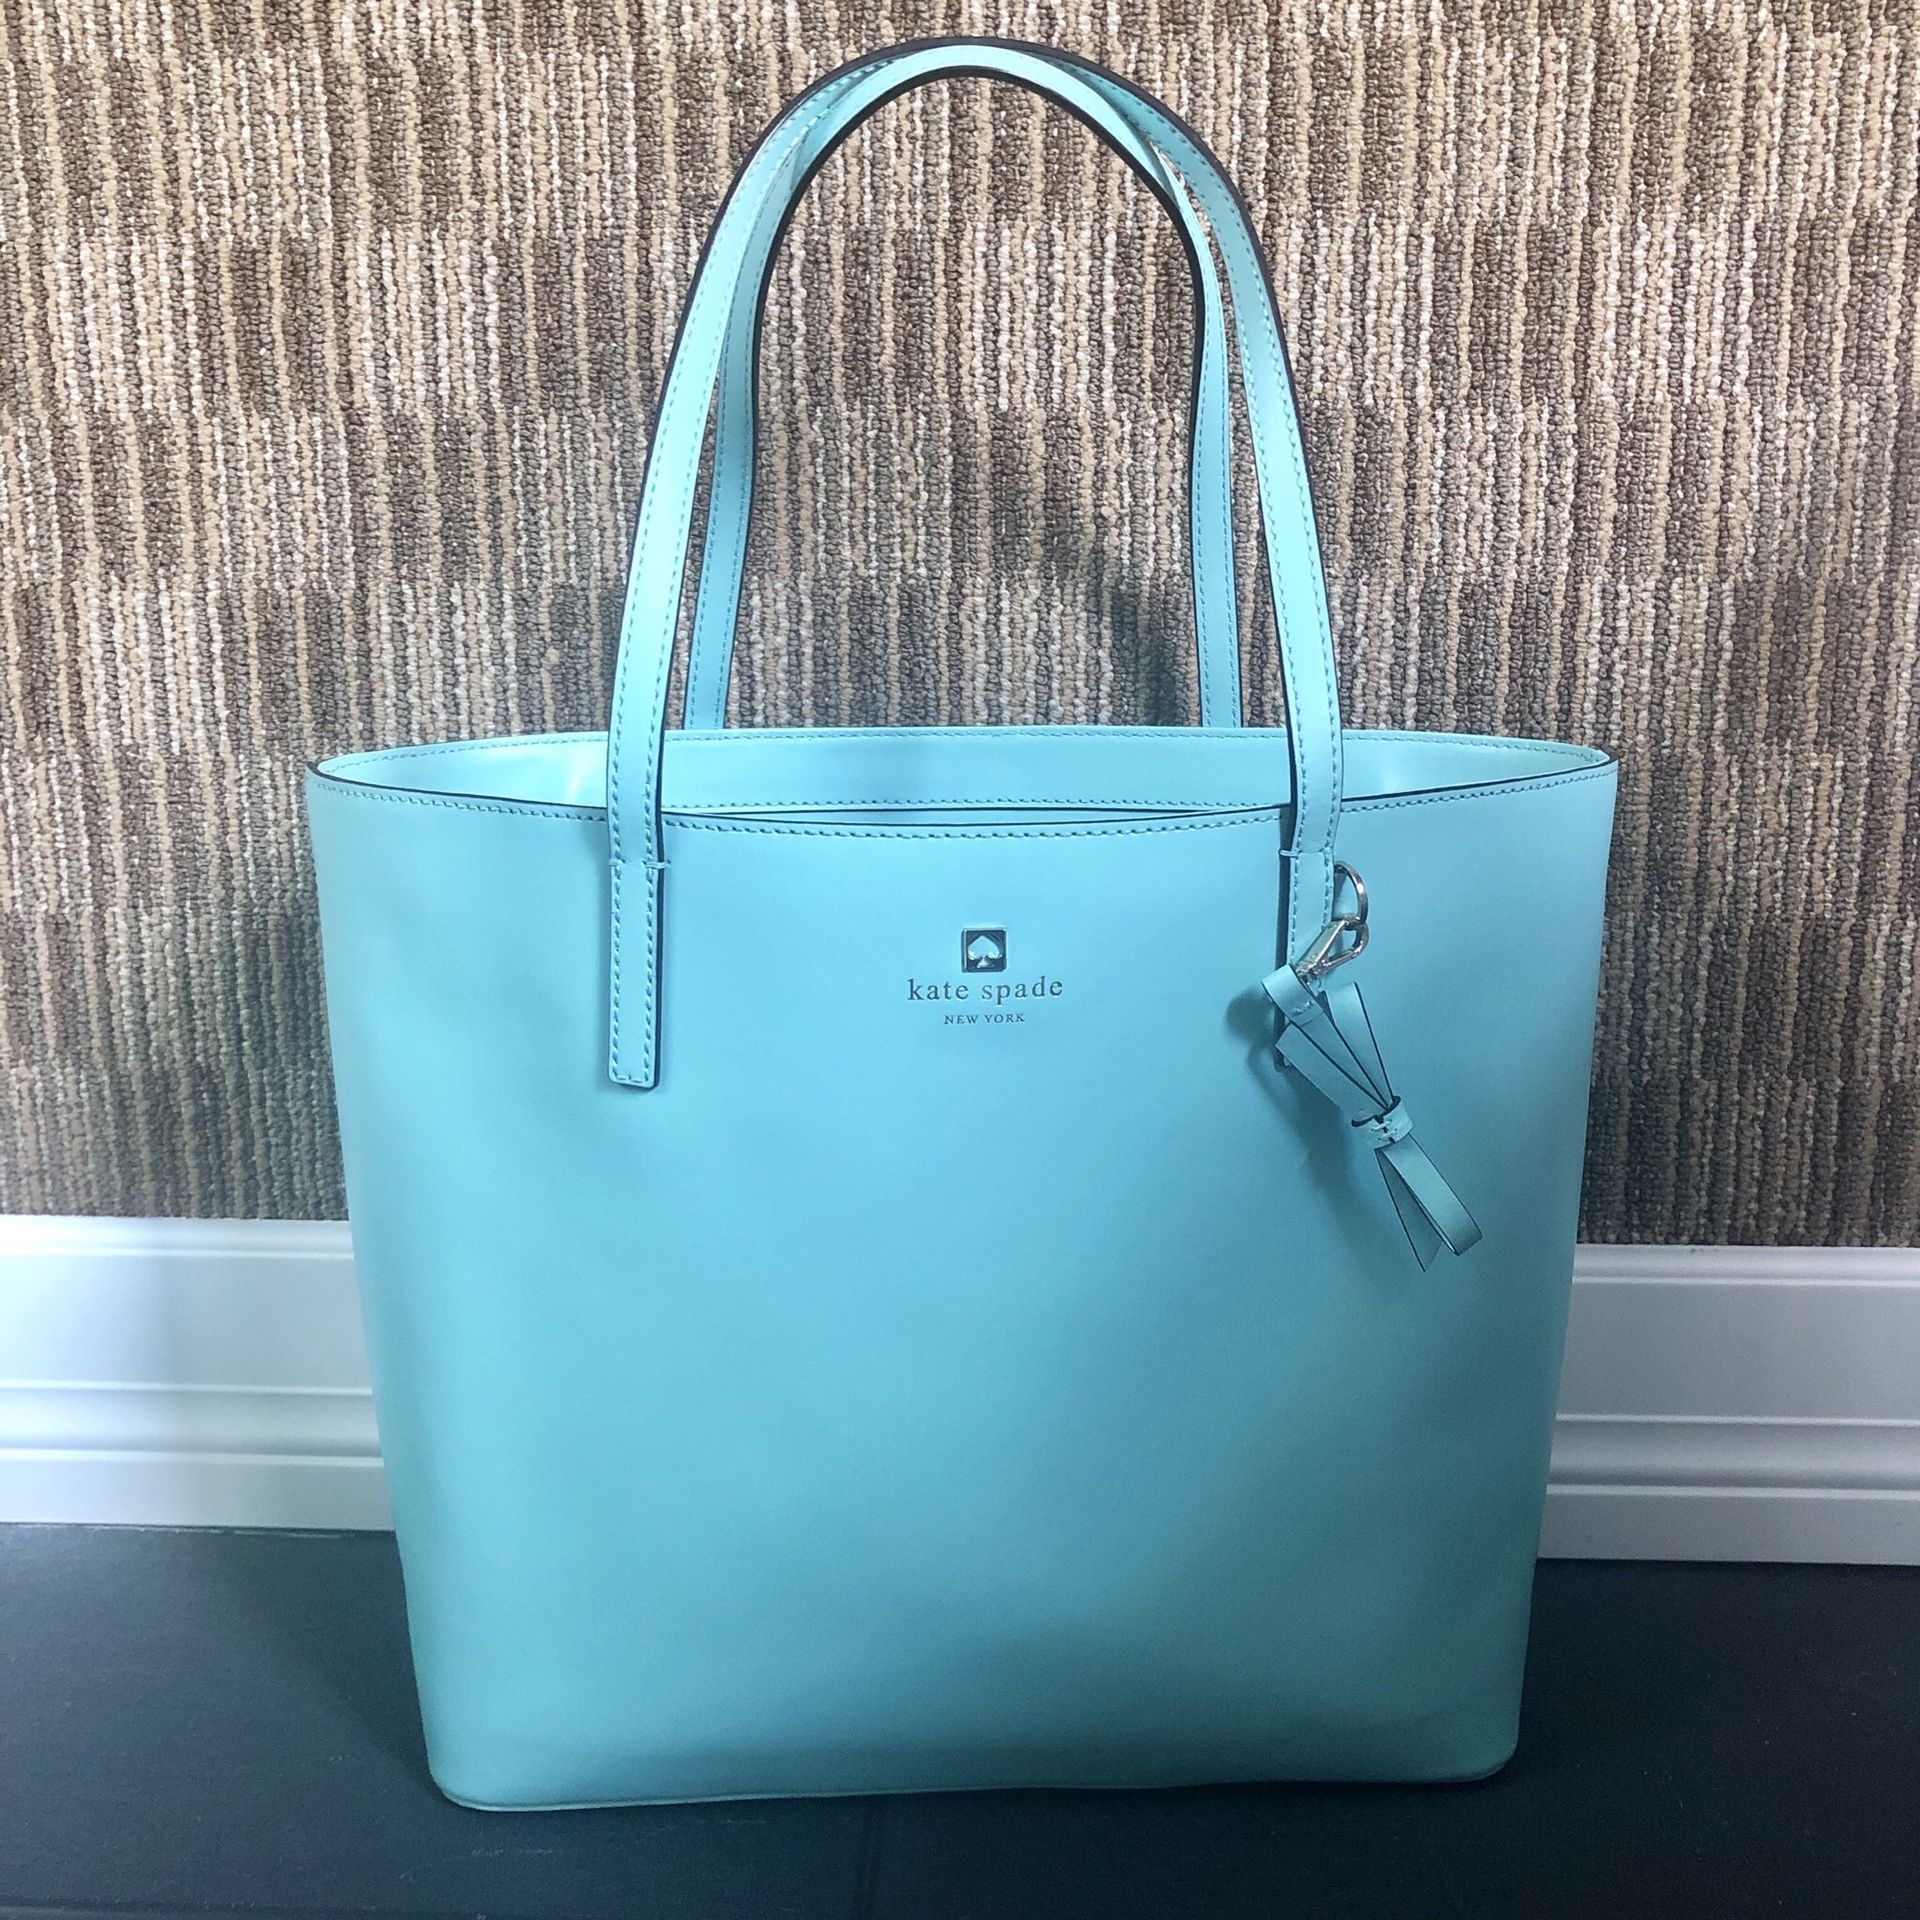 Brand new Kate spade tote color tiffany blue